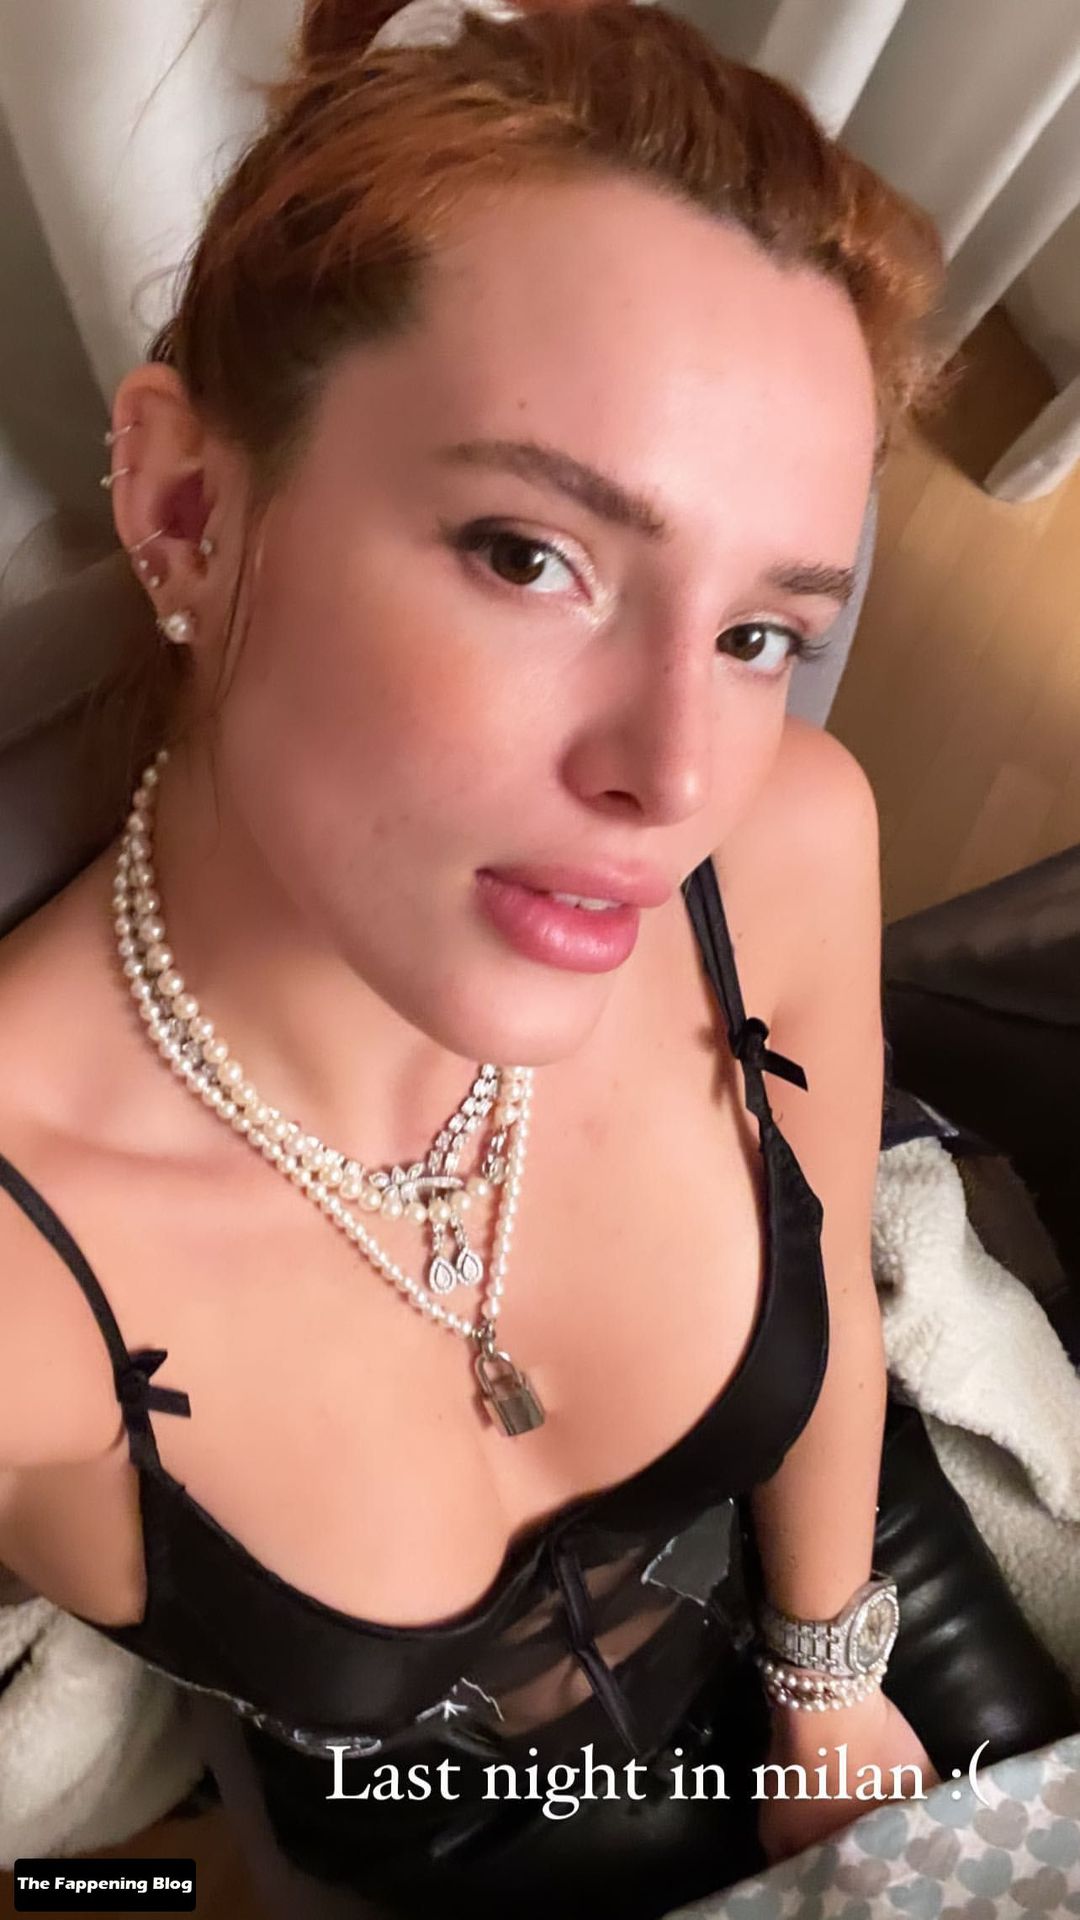 Bella-Thorne-Sexy-Cleavage-2-thefappeningblog.com_.jpg